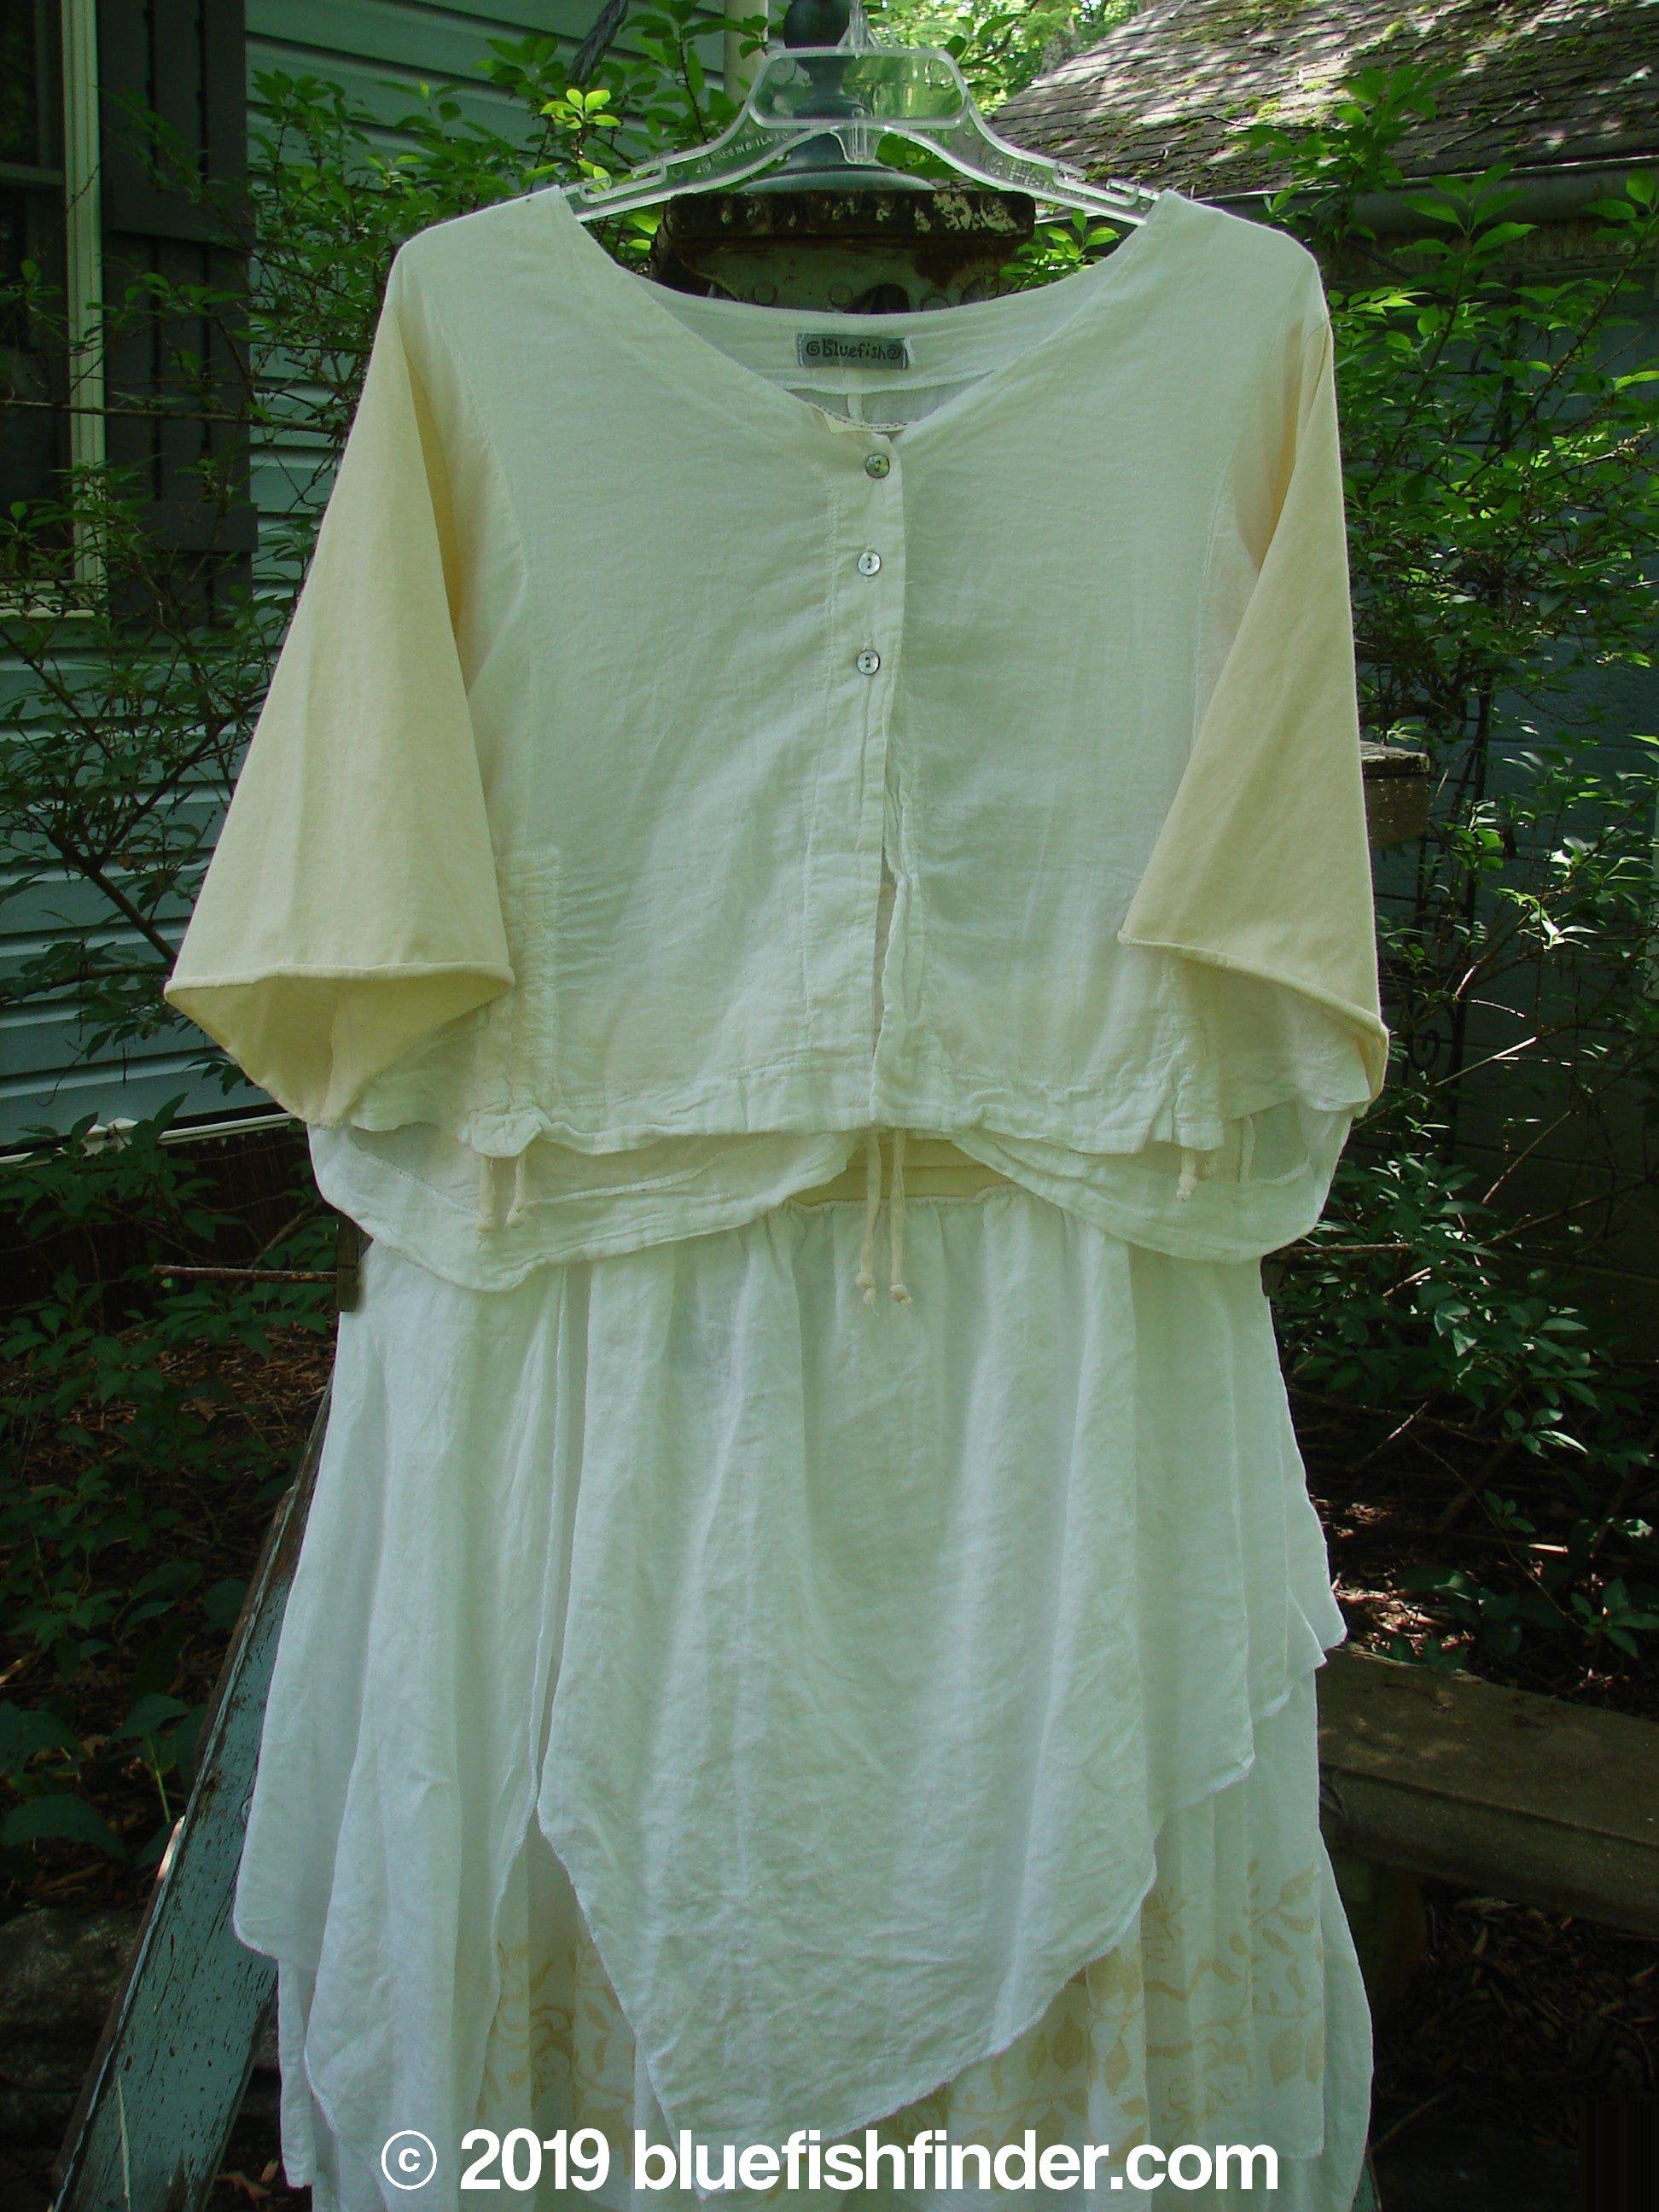 A white shirt and skirt on a clothesline, part of the Barclay NWT Batiste Draw Midi Meadow Trio in White. The shirt features a three-button front, three-quarter length sleeves, and a wider, boxier crop shape. The skirt has a full cotton paneled waistline, an outer layer of painted batiste set on the diagonal, and a sweeping batiste ruffled under layer. The set is made from a combination of organic cotton and batiste. Perfect for spring or summer!